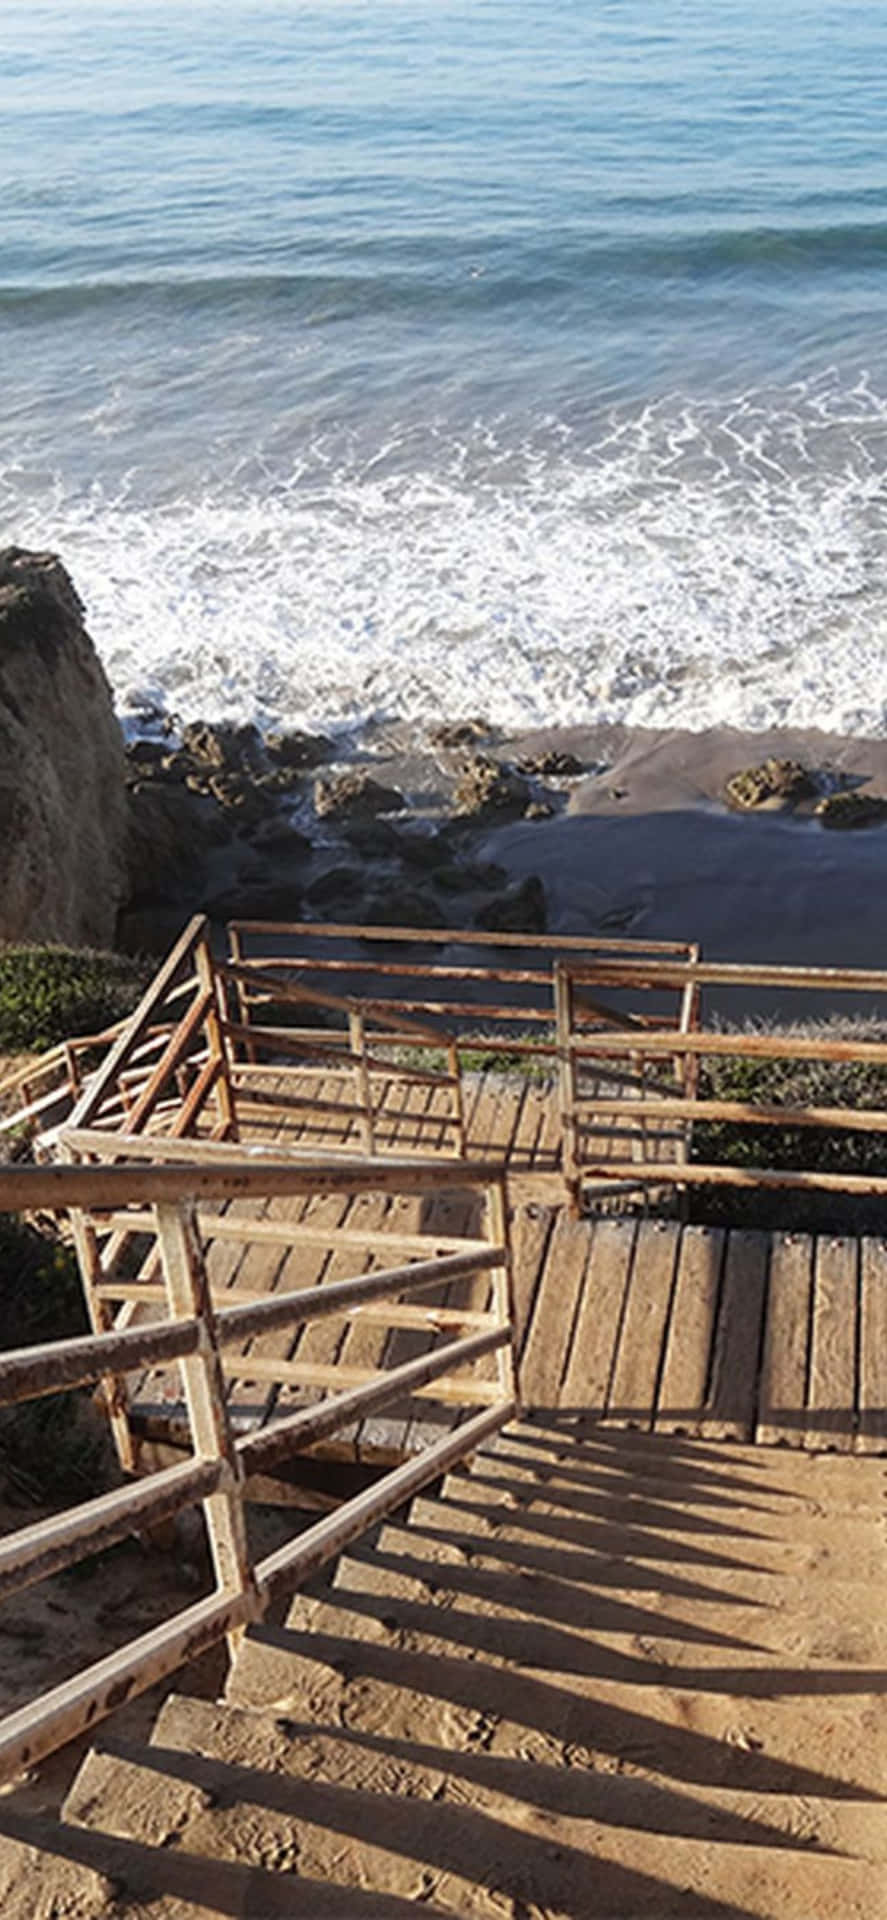 Iphone Xs Max Malibu Staircase By The Beach  Background